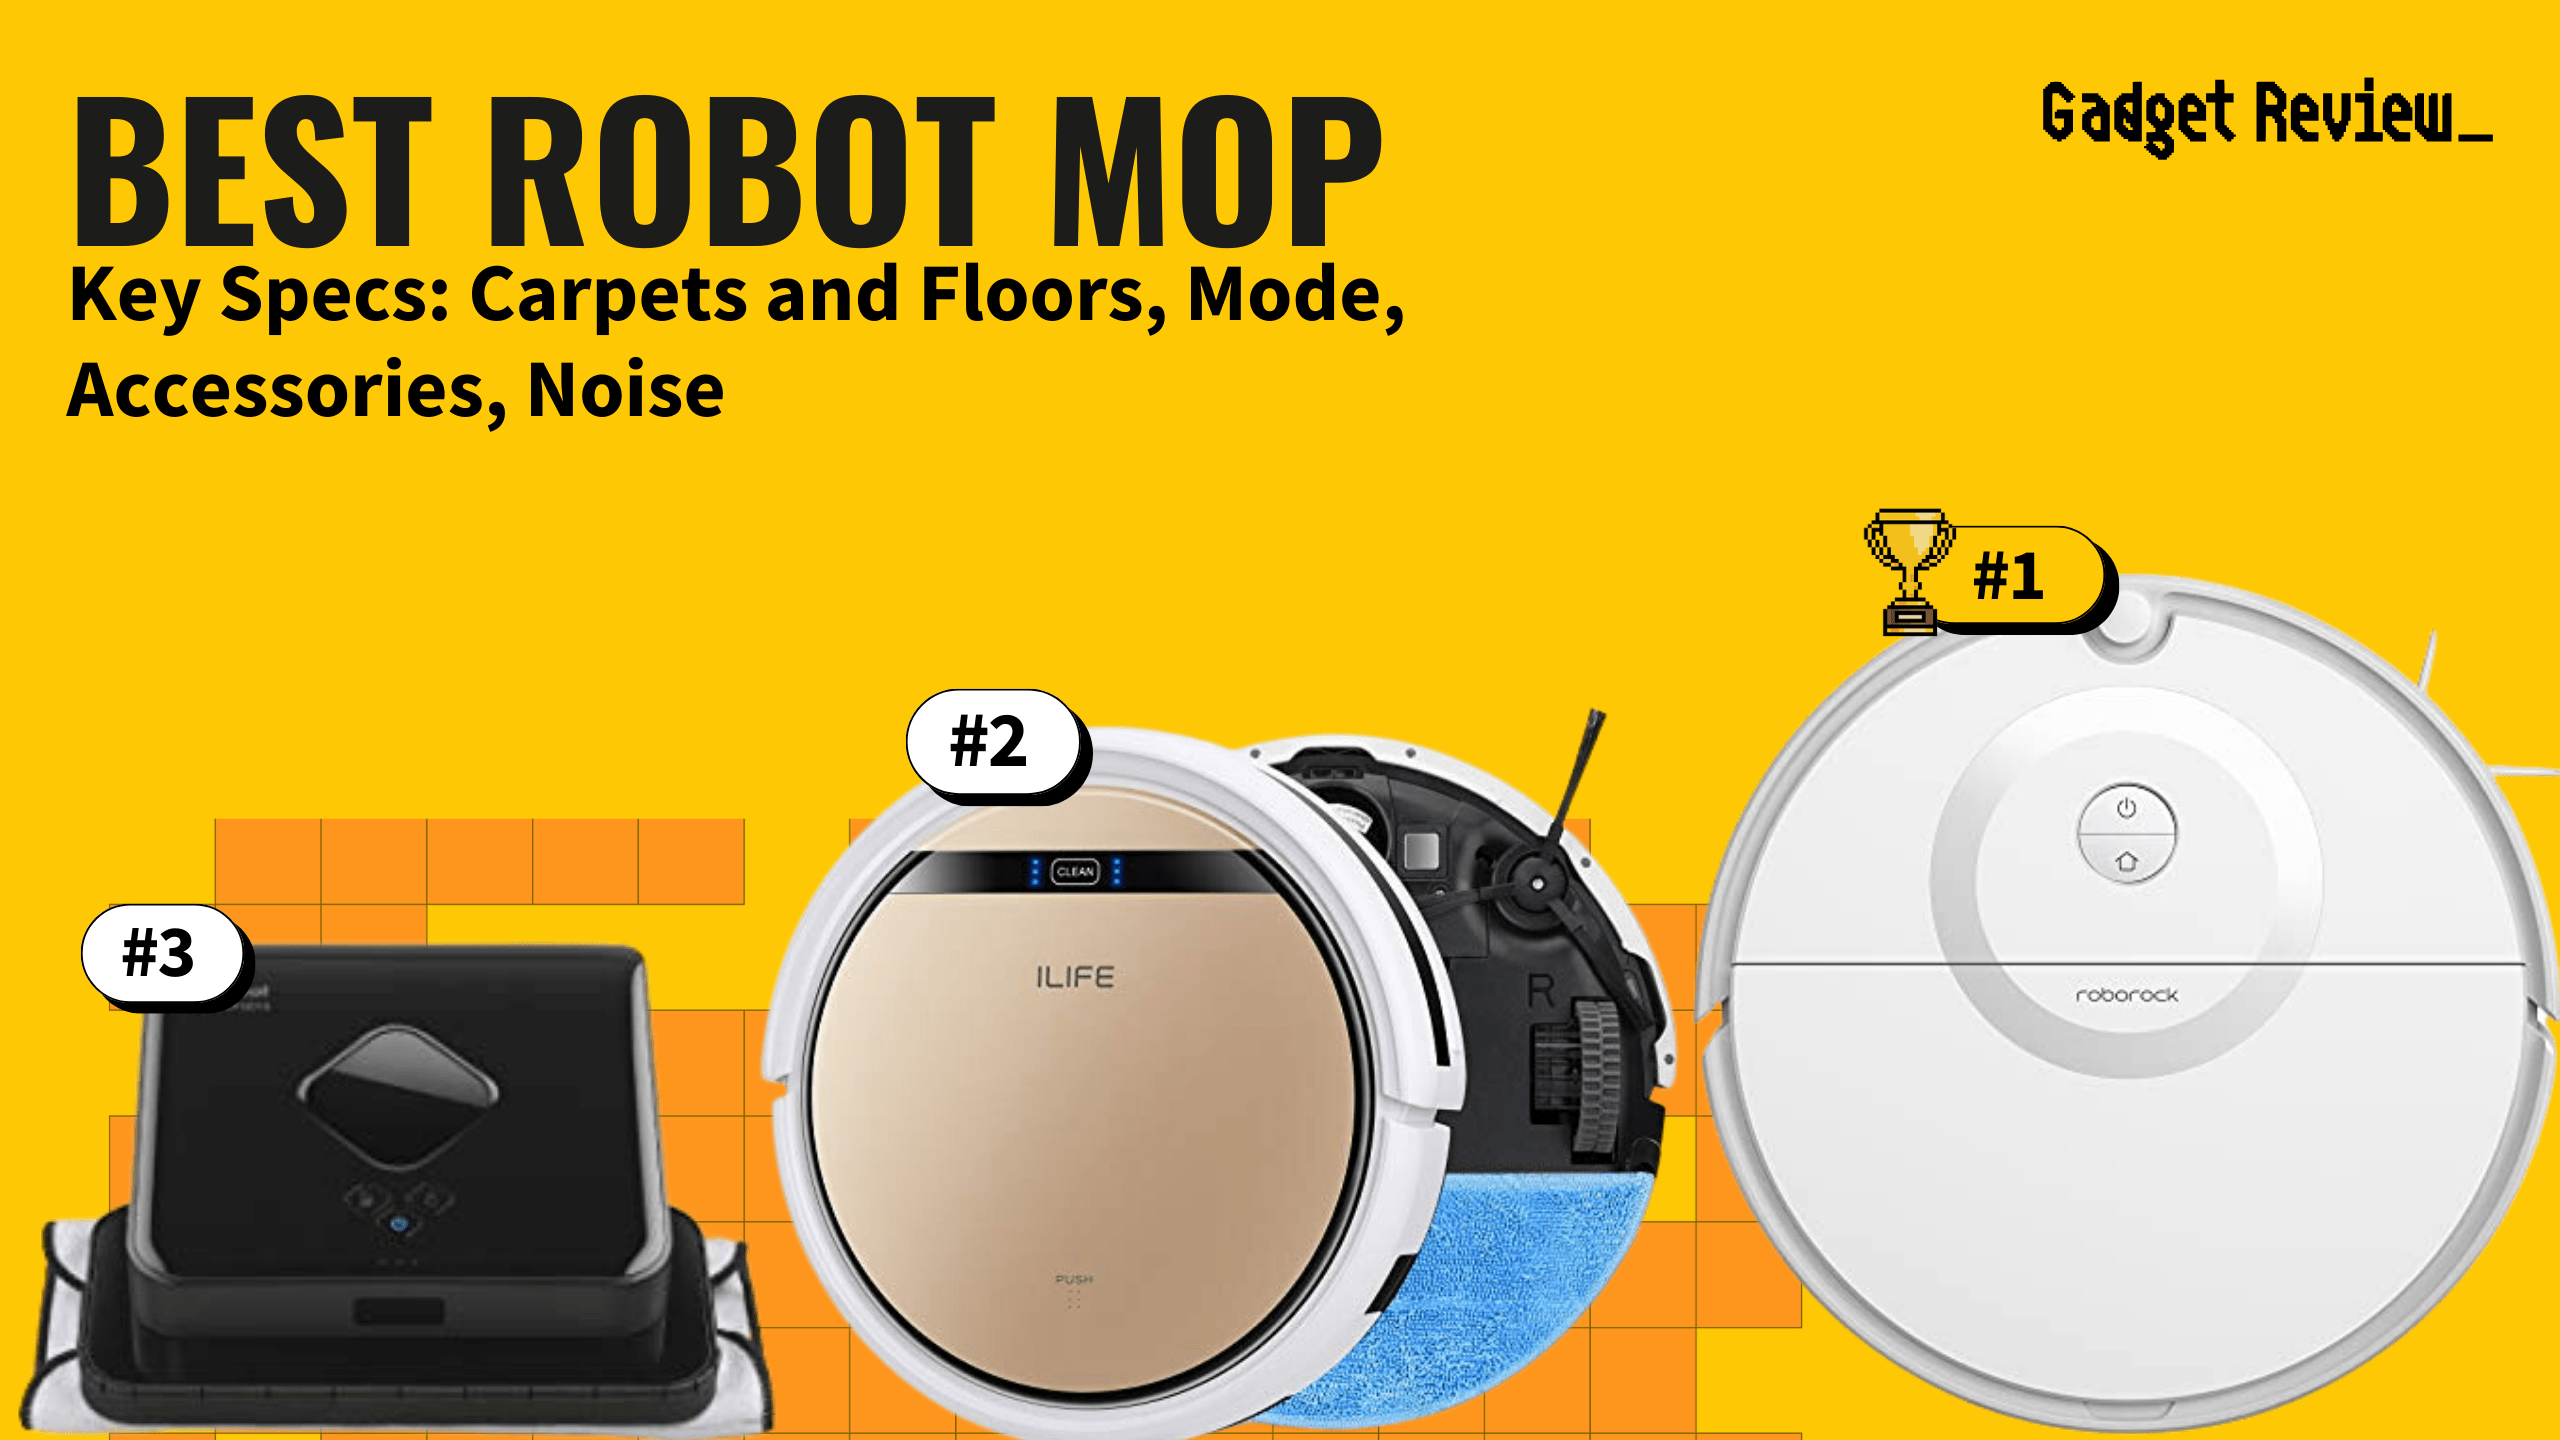 best robot mop featured image that shows the top three best robot vacuum models